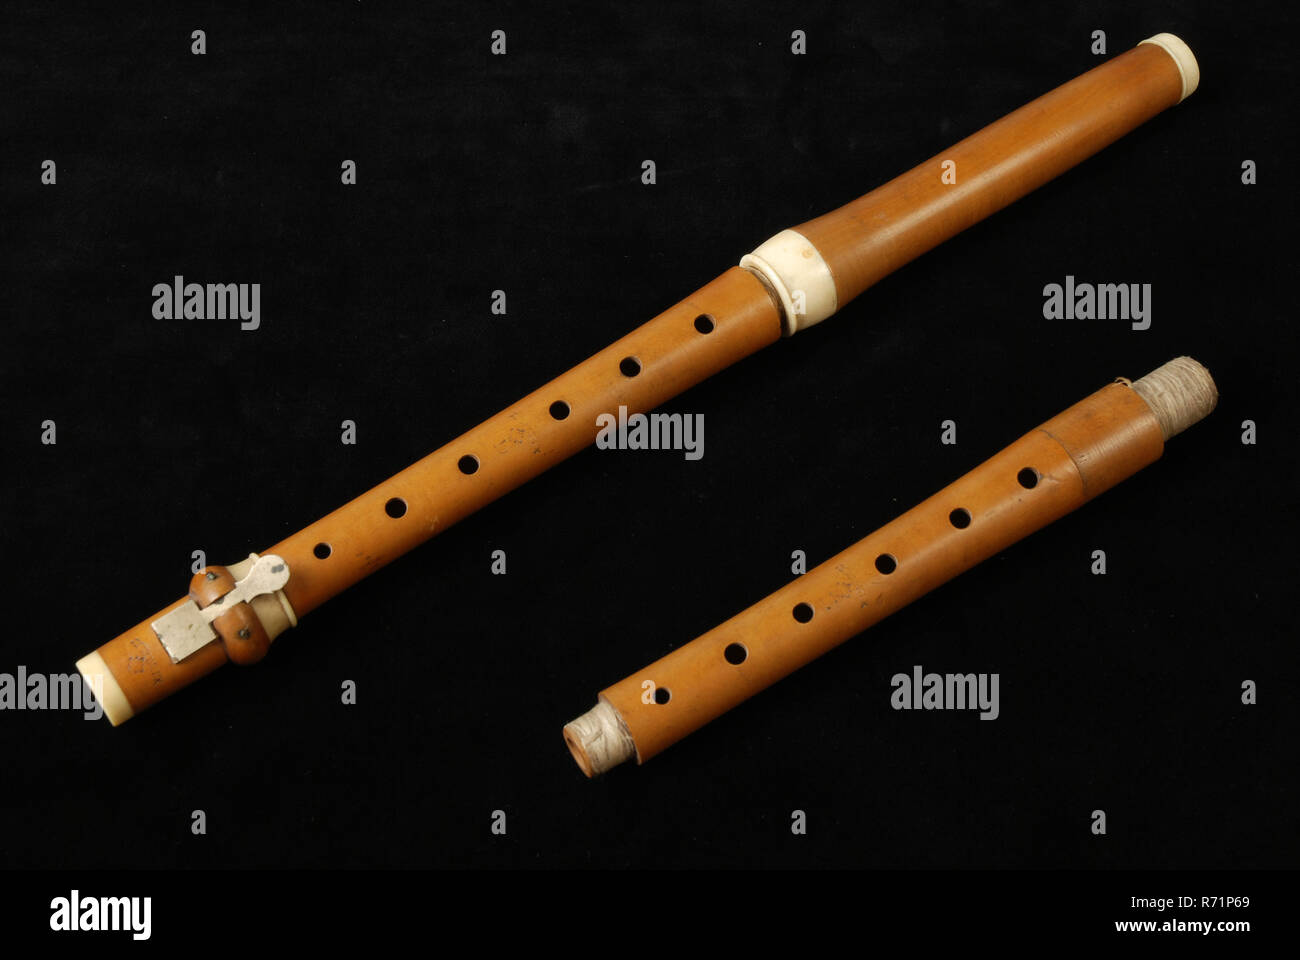 Tuerlinckx, Three-part wooden flute with additional spacer, flute flute  aethiop musical instrument acoustic palm wood? wood copper metal ivory,  twisted drift Wooden flute in three parts with ivory pieces. The middle  section,